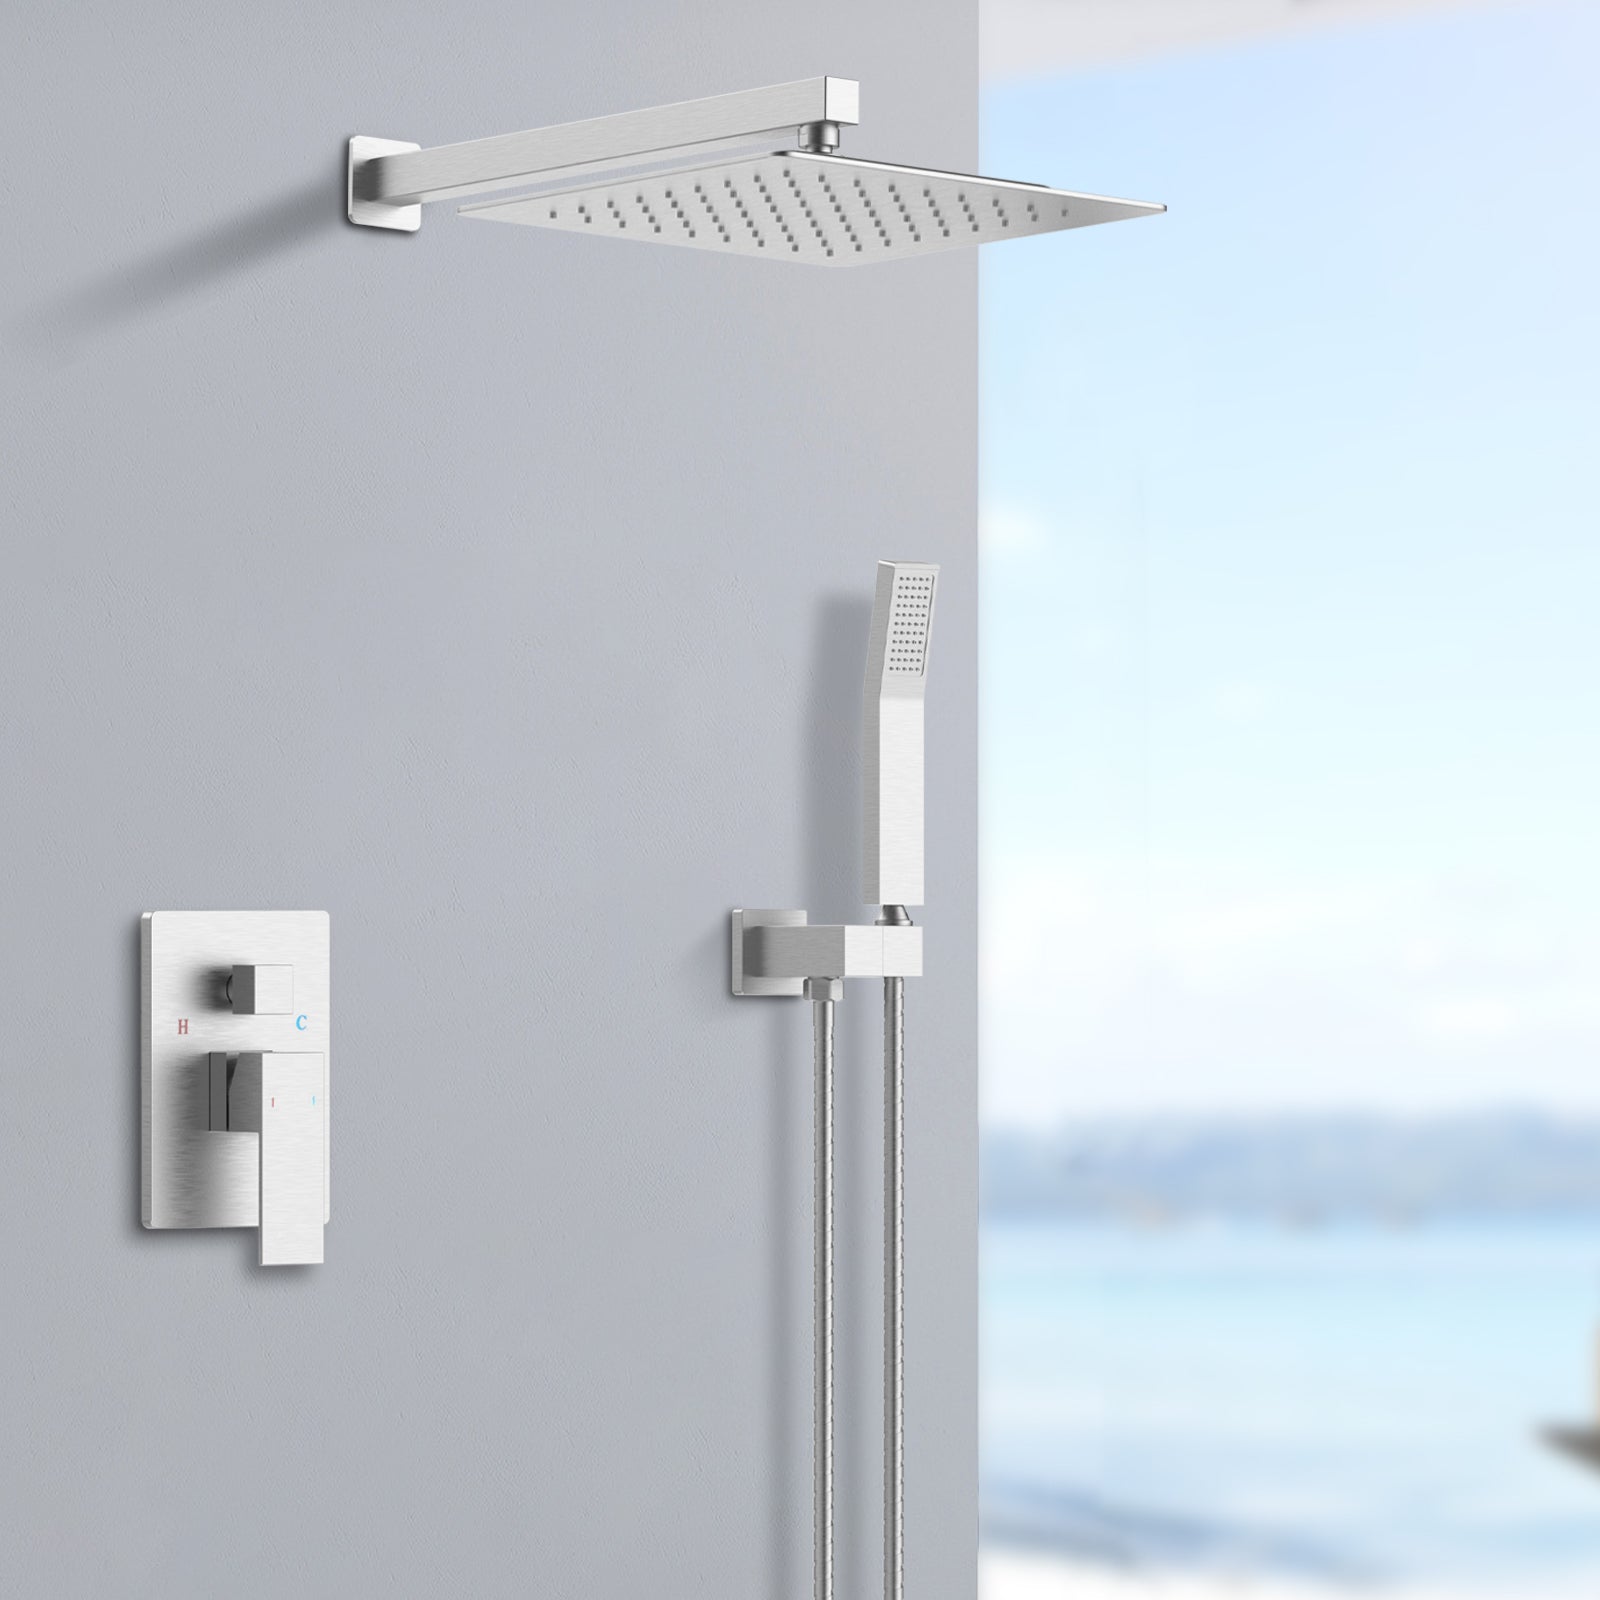 ZNTS Shower System Shower Faucet Combo Set Wall Mounted with 12" Rainfall Shower Head and handheld shower 19881778